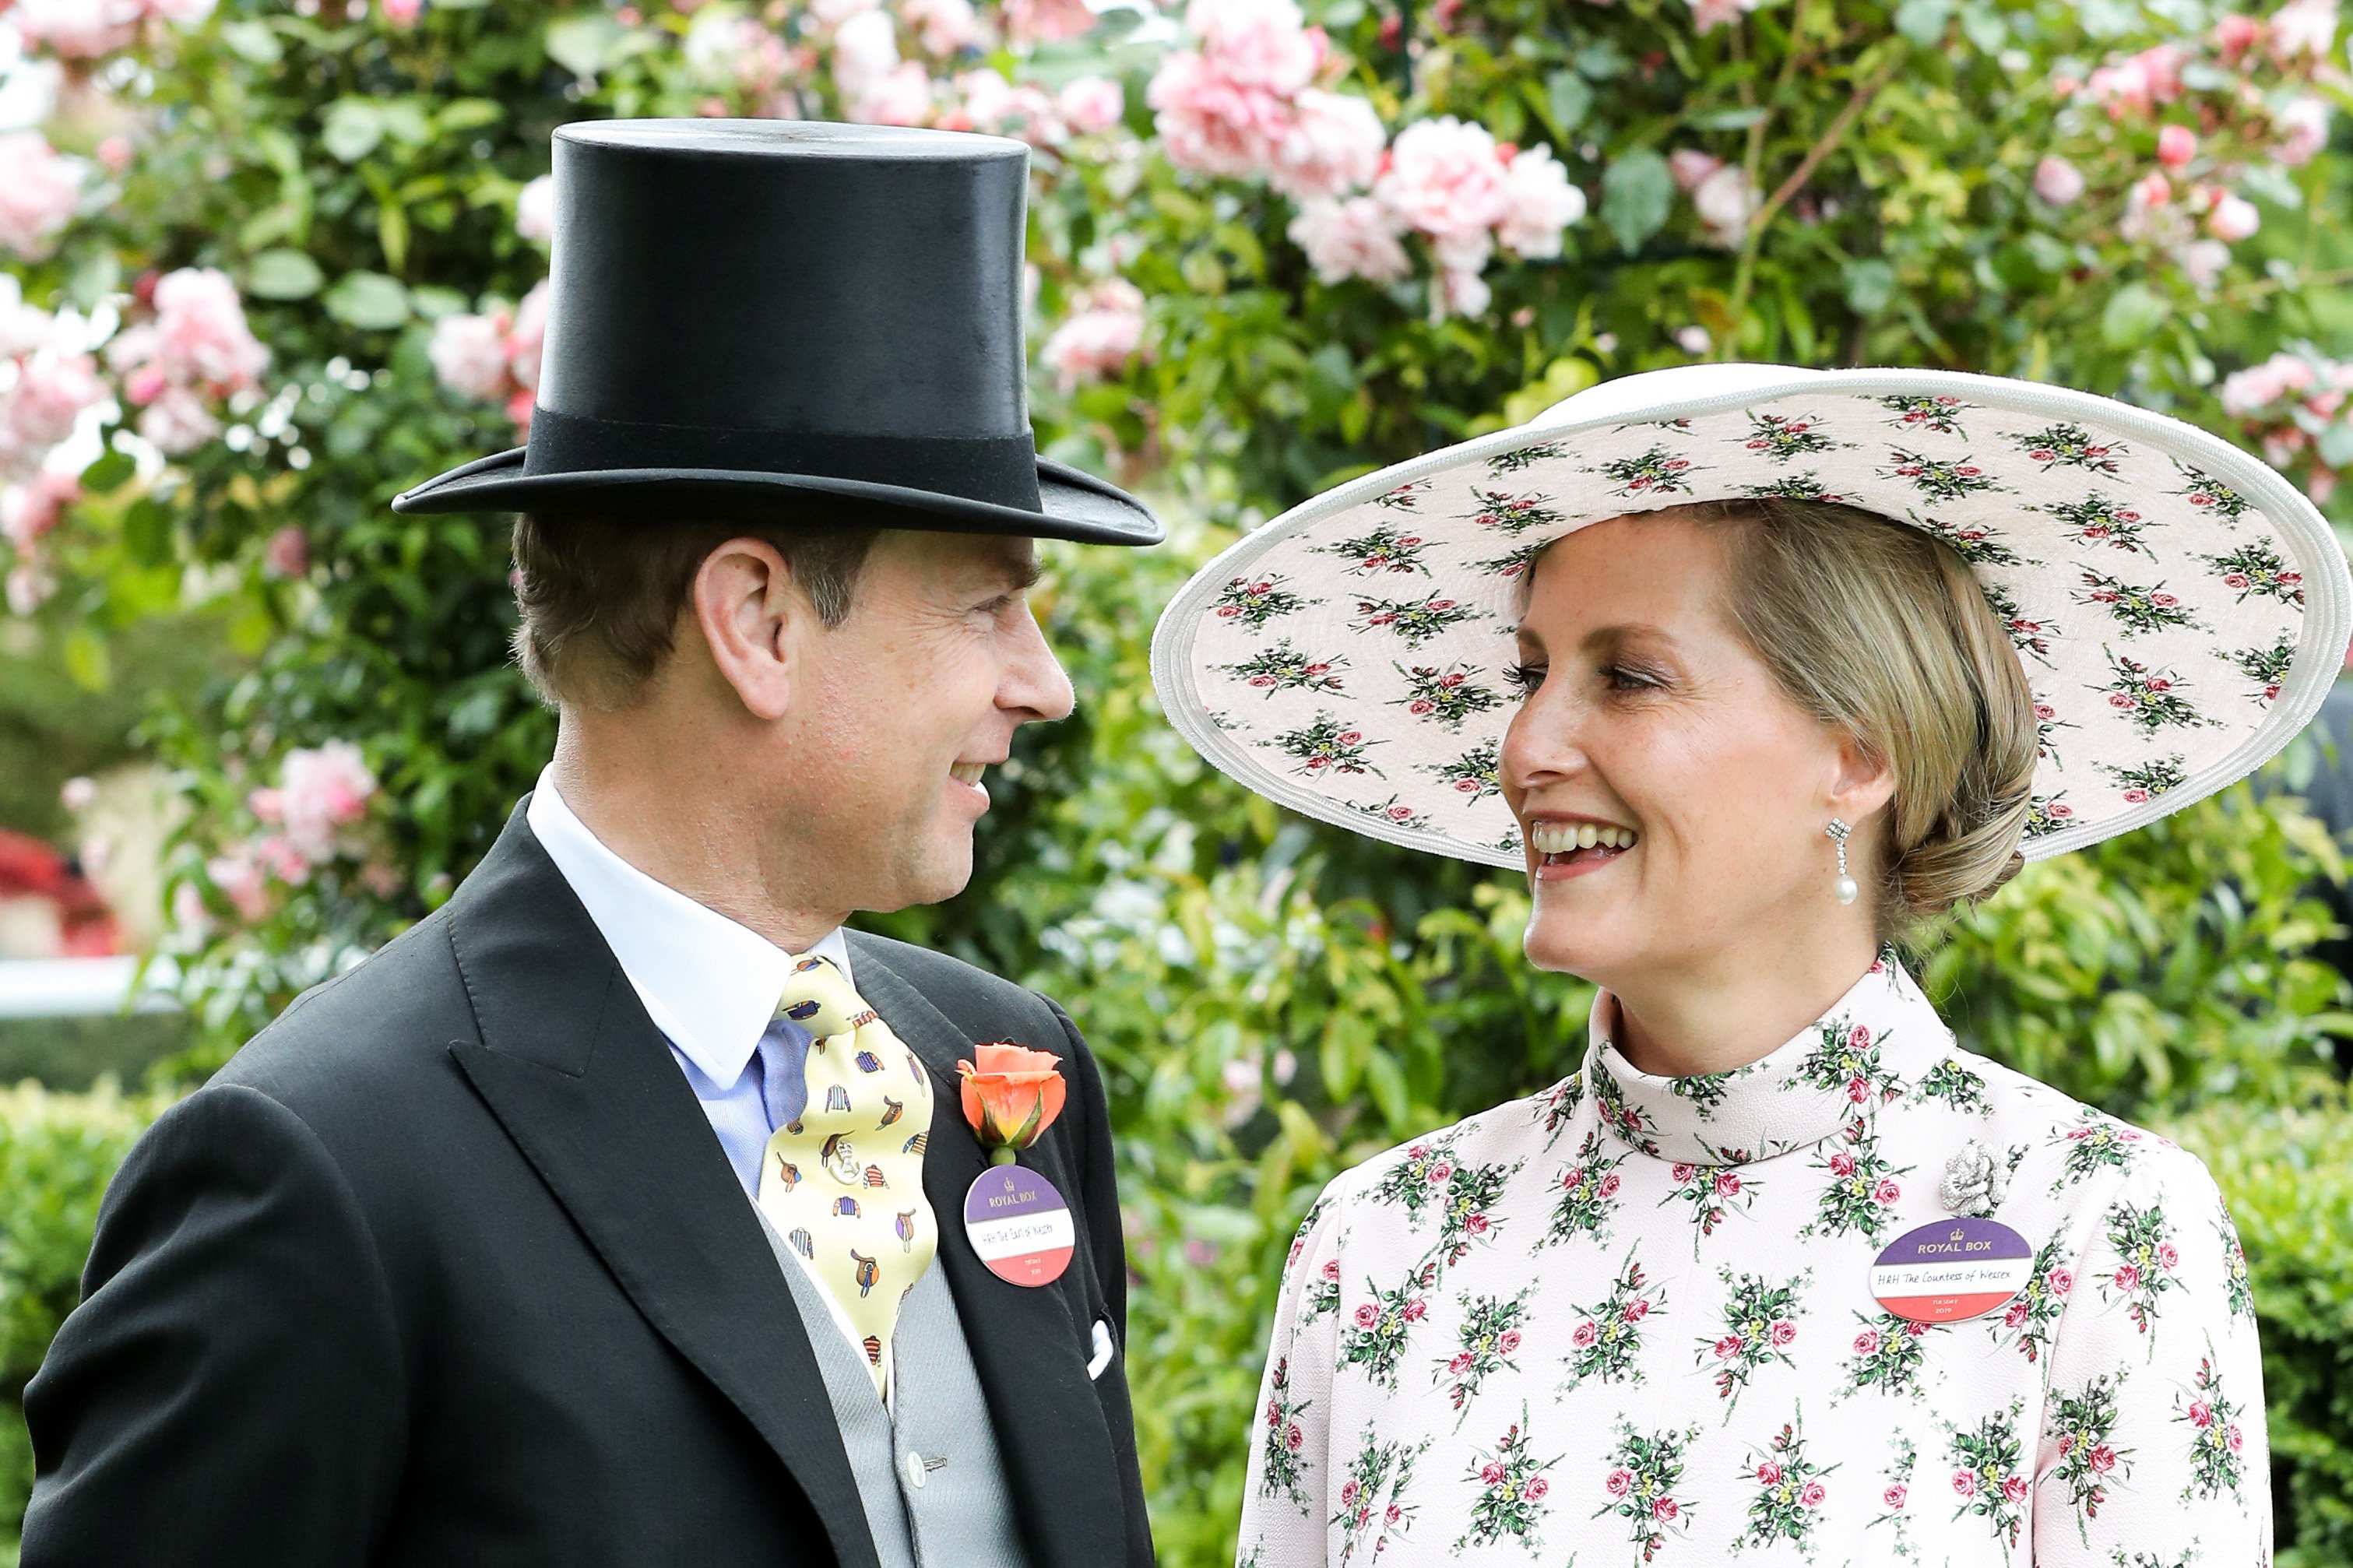 Prince Edward, Duke of Wessex and Sophie, Countess of Wessex pose for photographs ahead of their 20th wedding anniversary on day one of Royal Ascot at Ascot Racecourse on June 18, 2019 in Ascot, England | Source: Getty Images